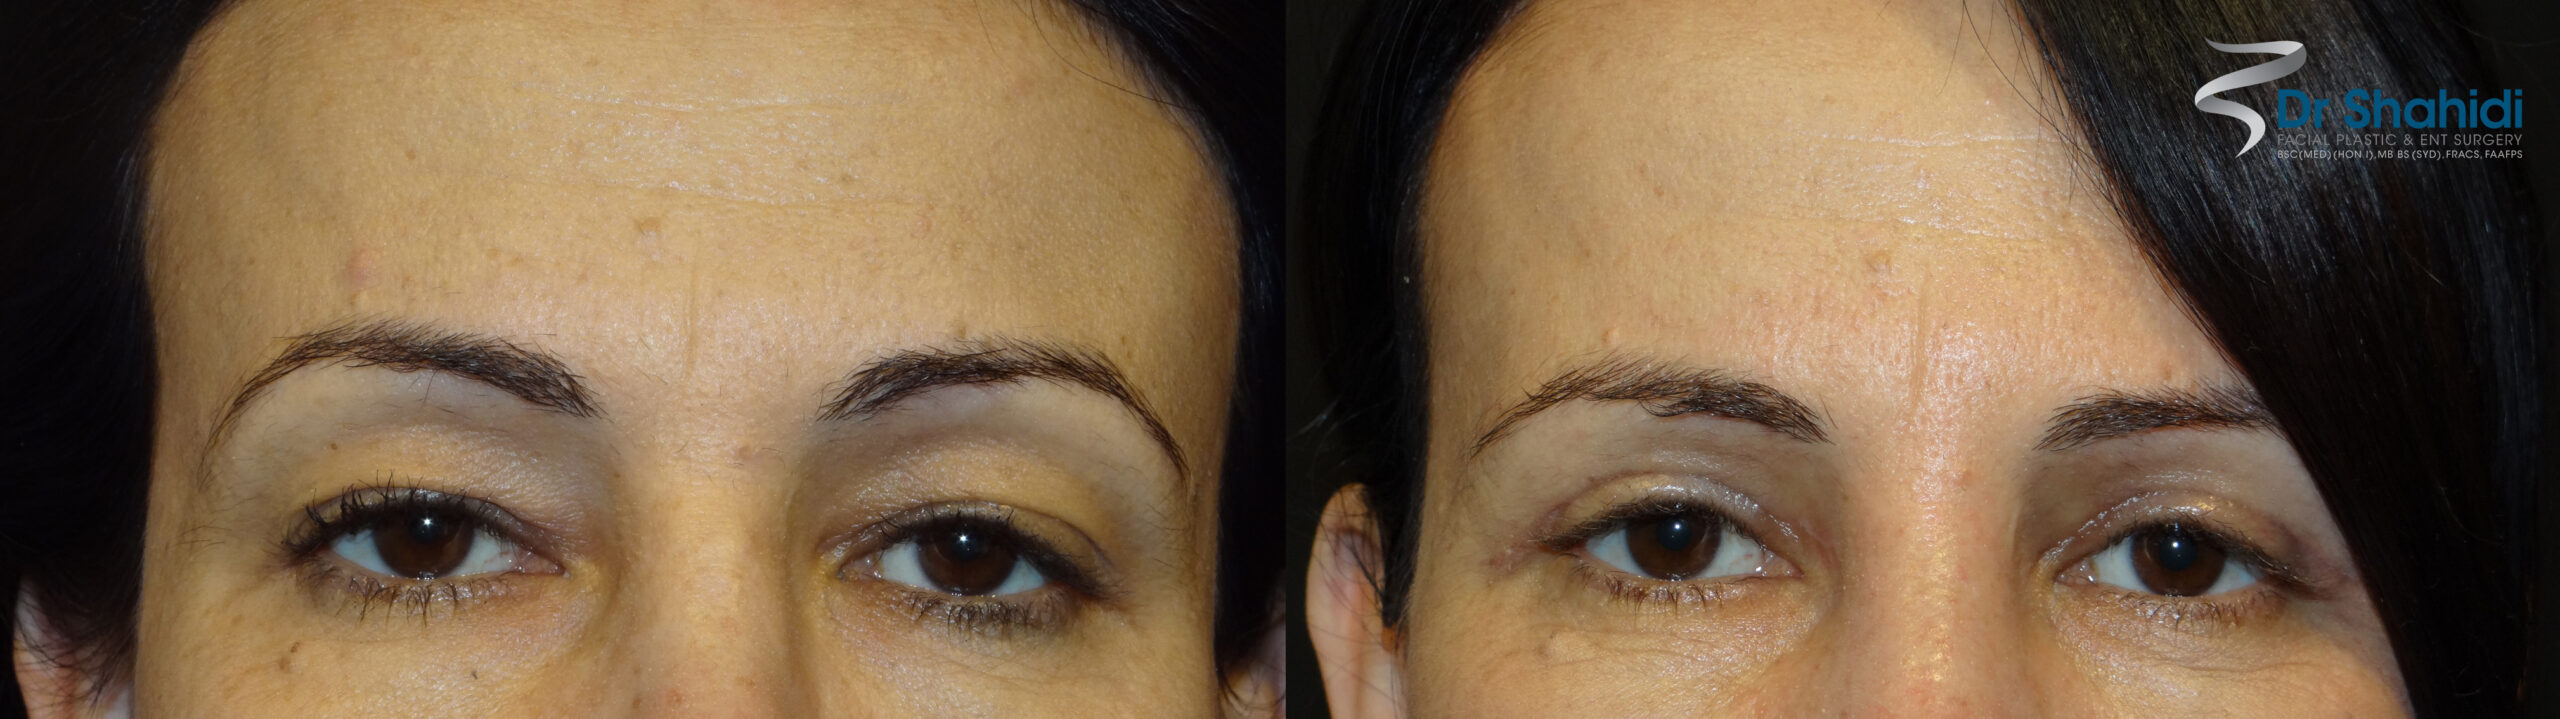 Blepharoplasty Before and After Gallery